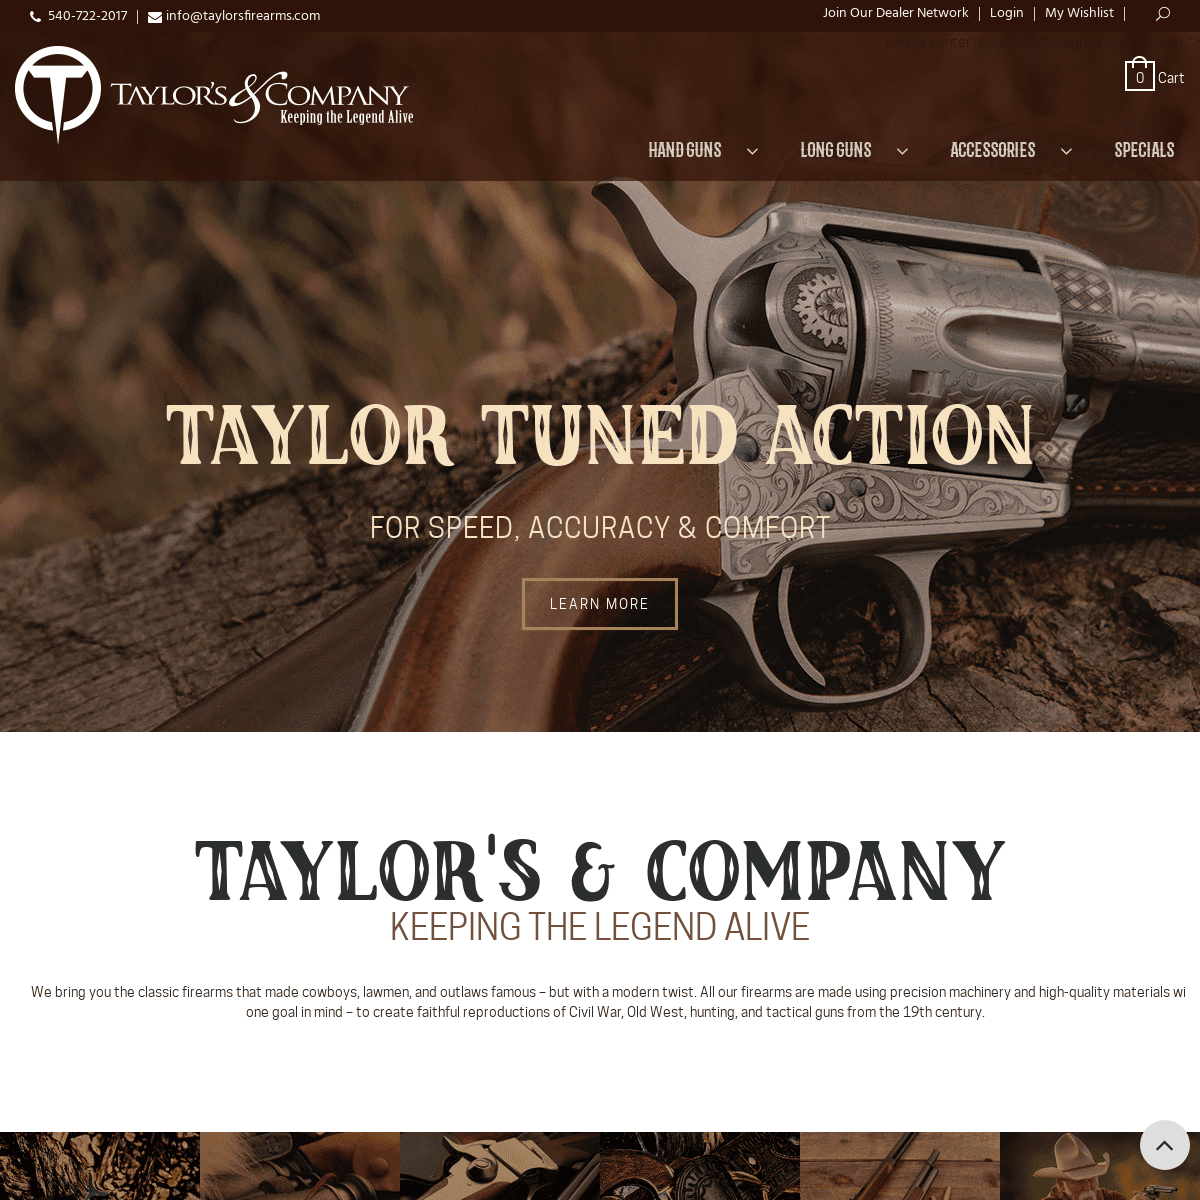 A complete backup of taylorsfirearms.com